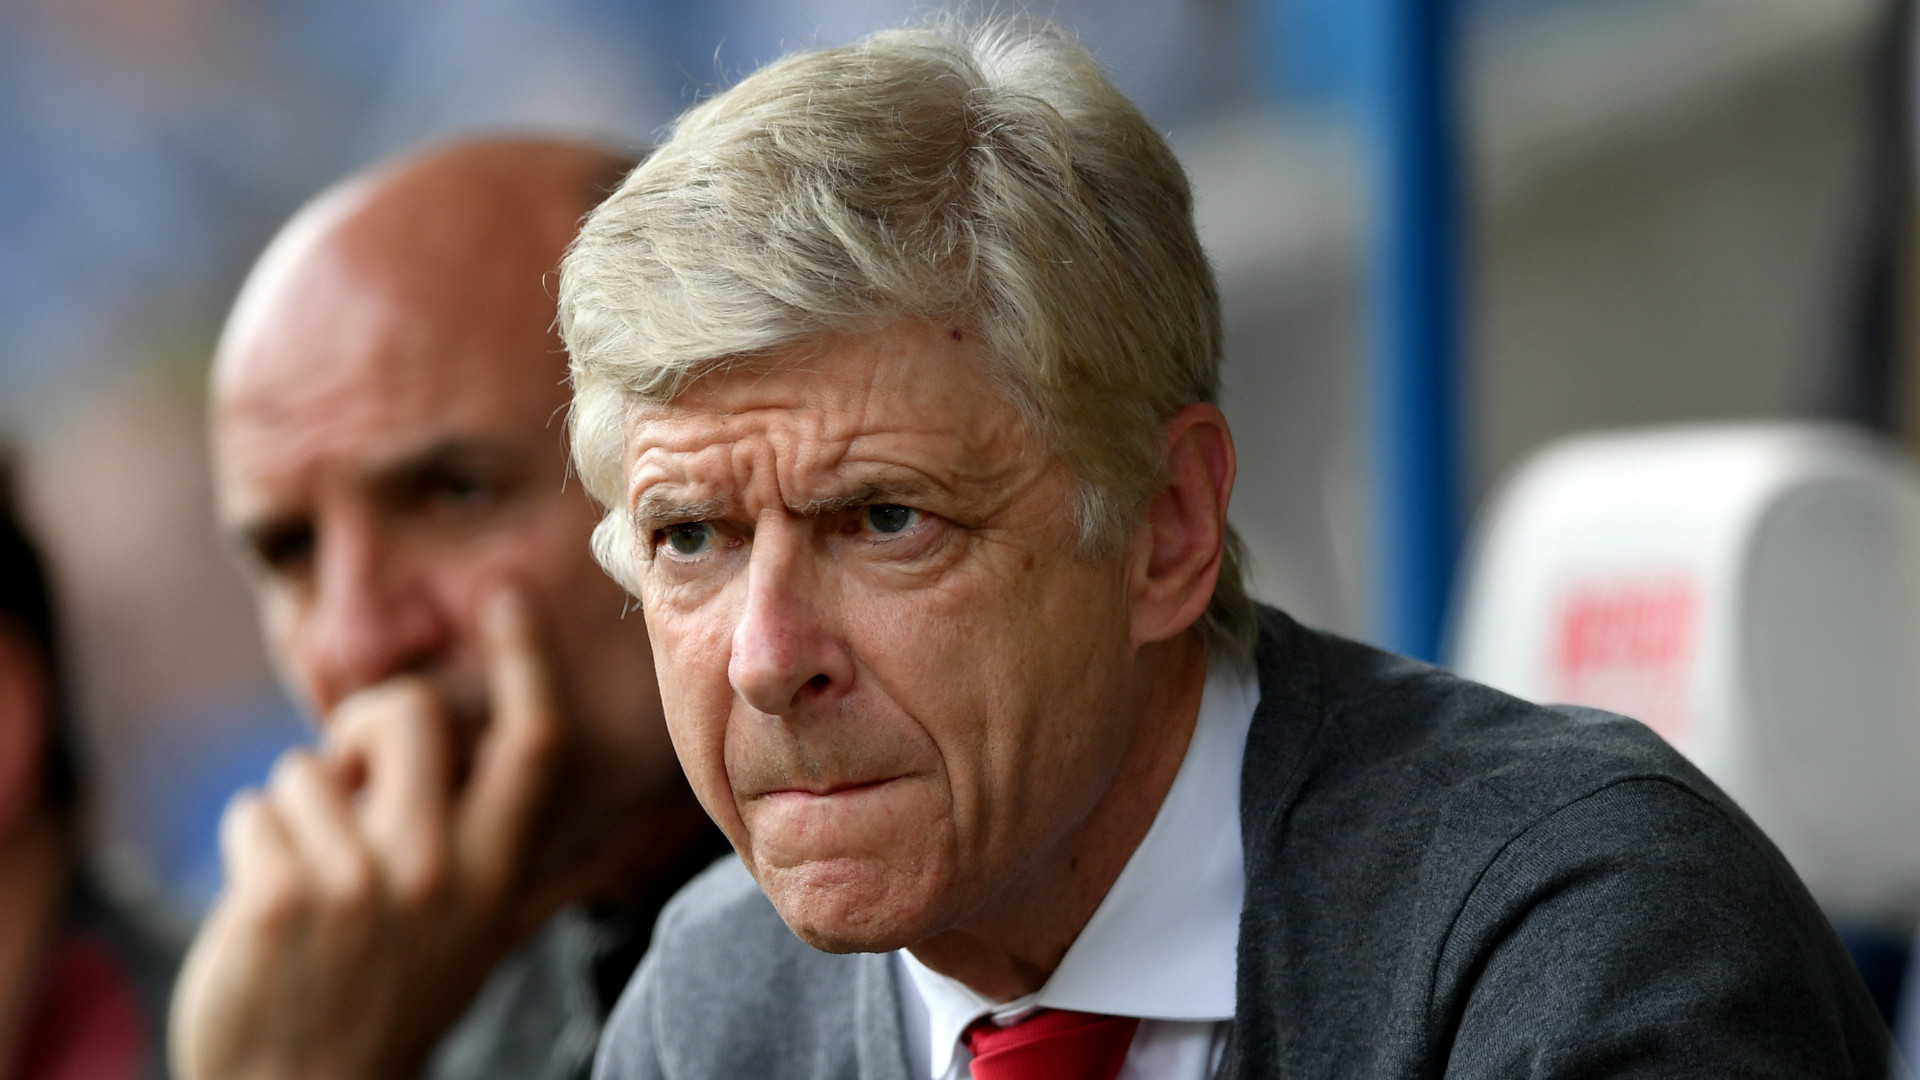 Arsène Wenger to get honour from George Weah